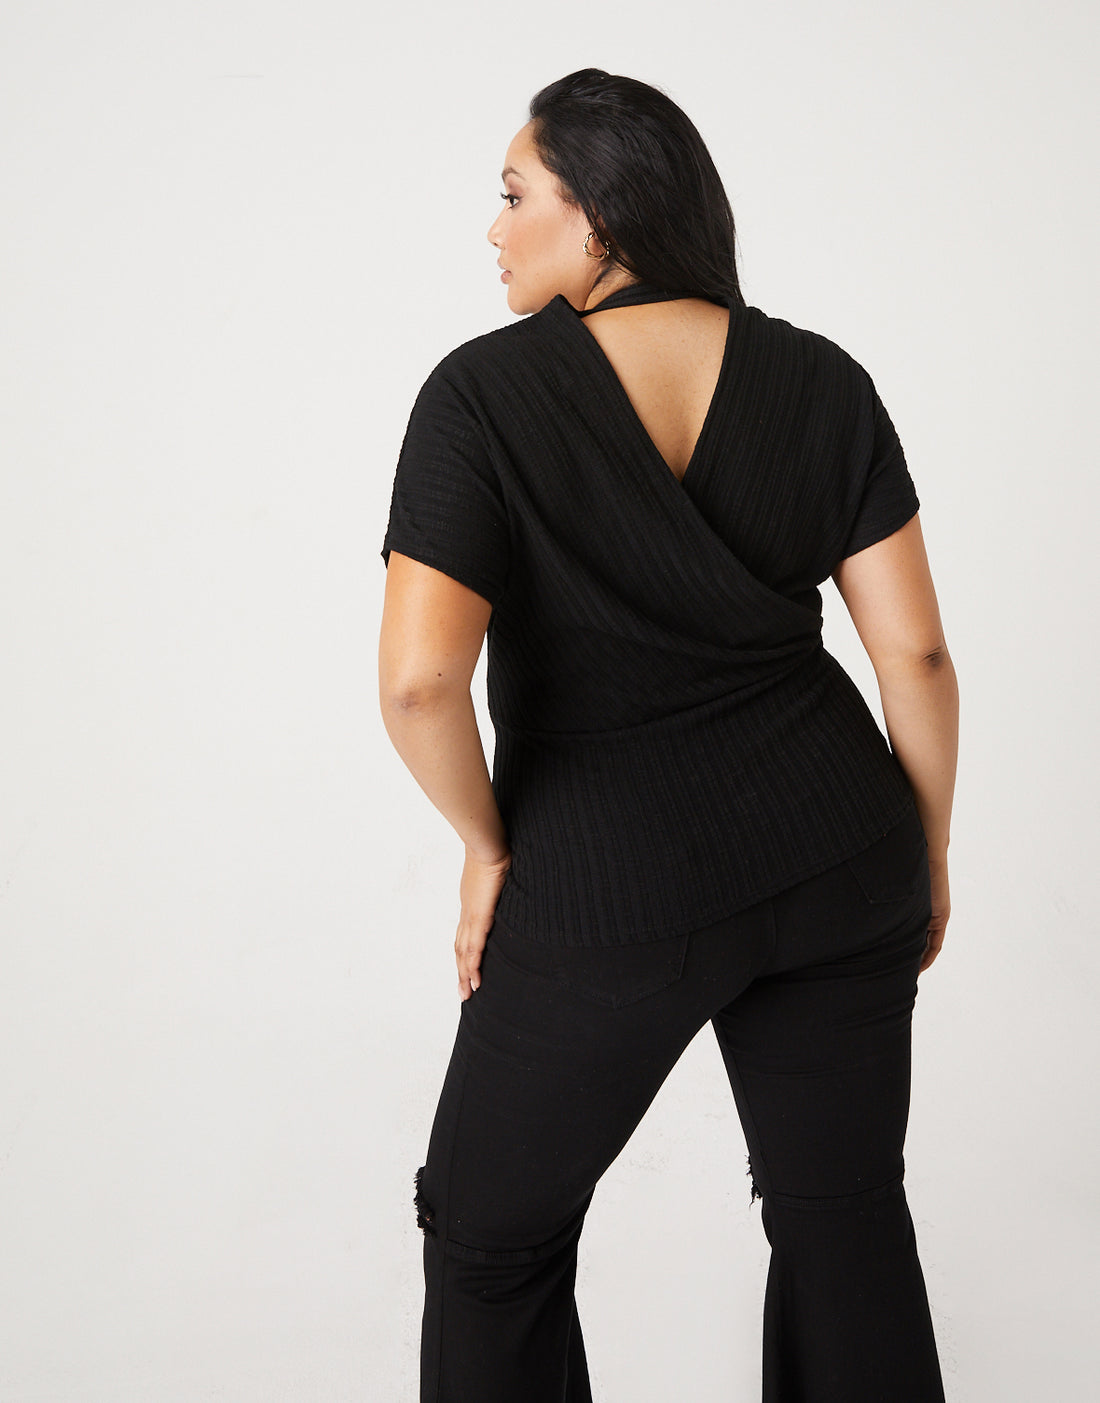 Curve Full-Length Wrap Top Plus Size Tops -2020AVE